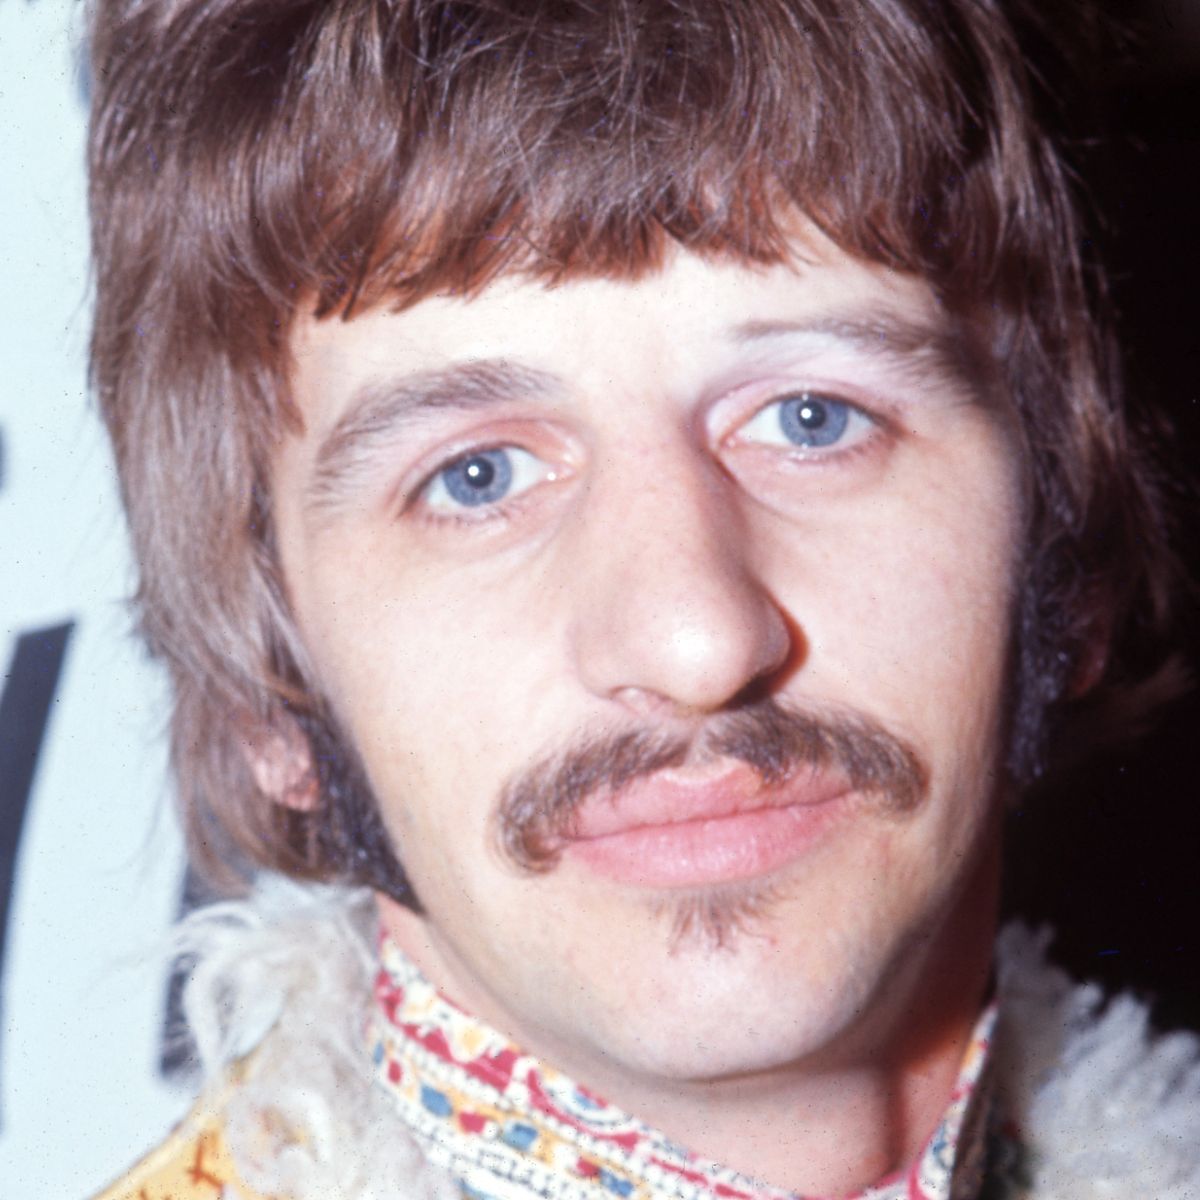 What happened to Ringo Starr's eyebrow? Famous People Today